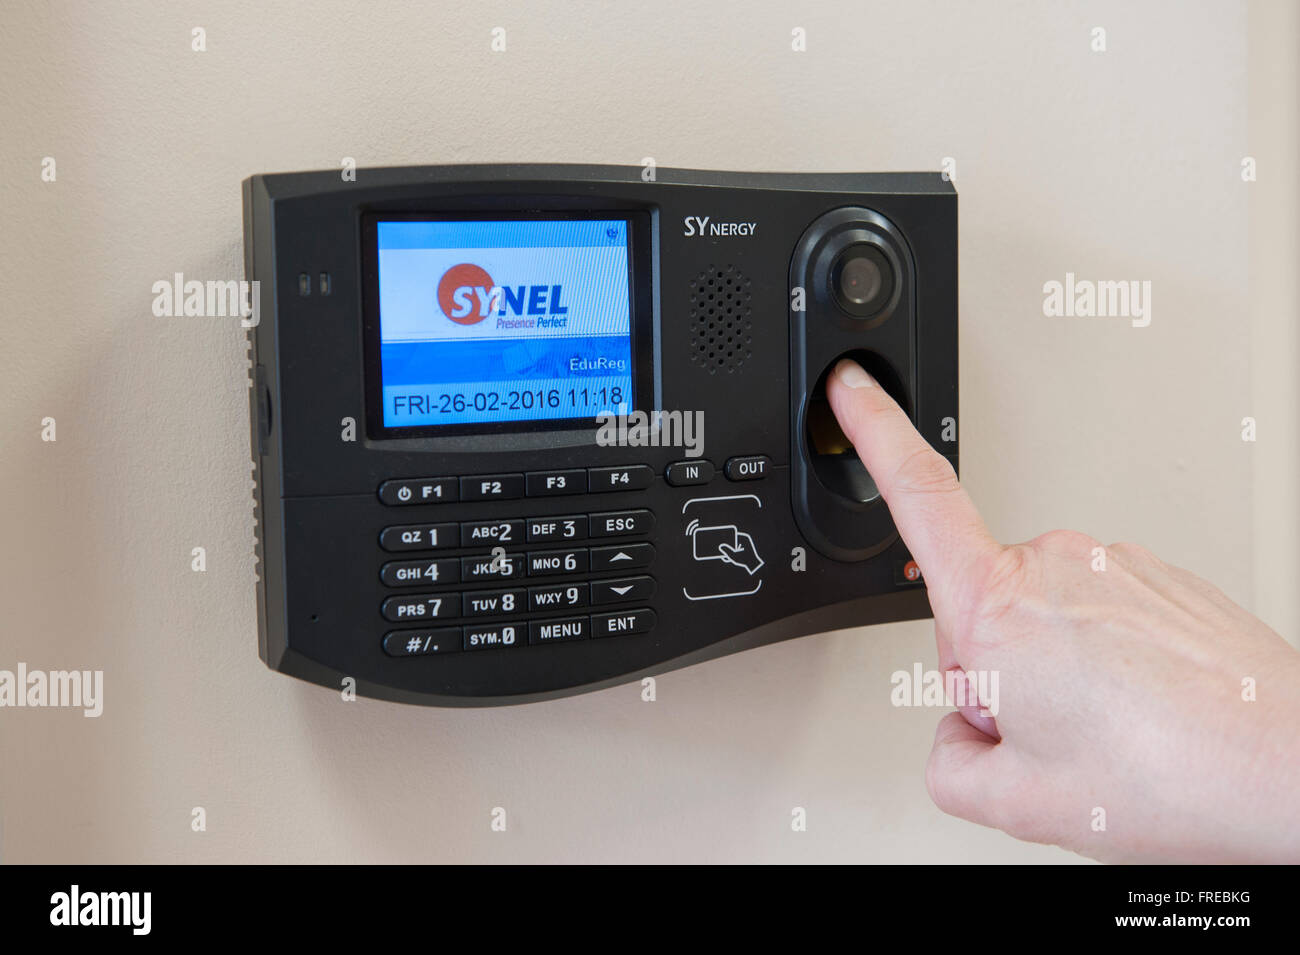 Biometric identification fingerprint recognition security access control in use Stock Photo